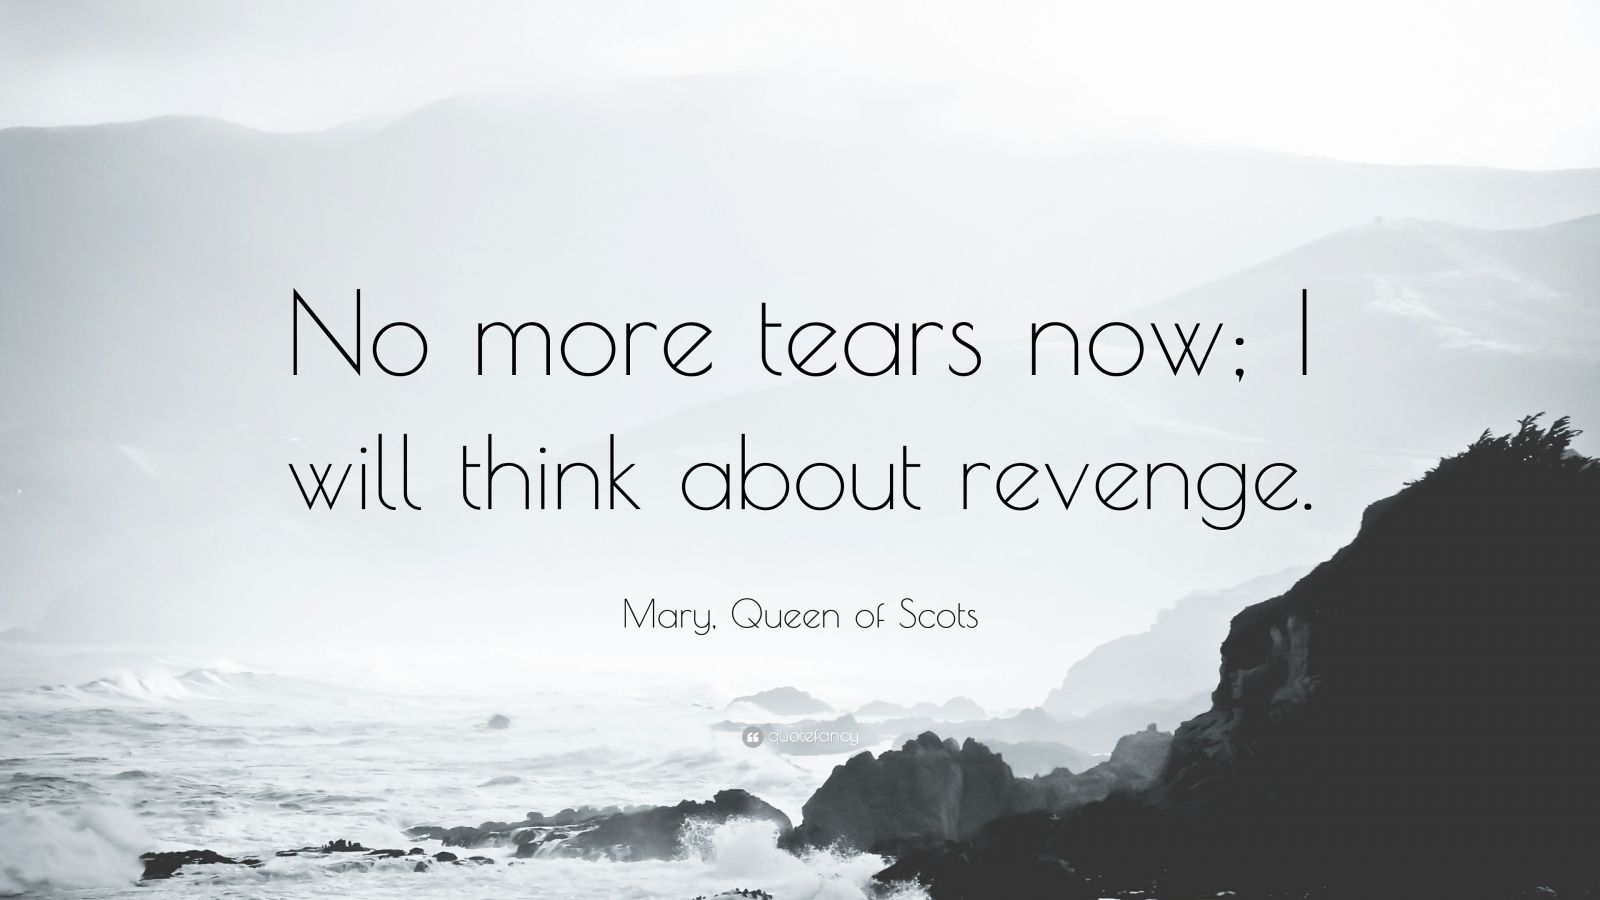 Mary, Queen of Scots Quote: “No more tears now; I will think about